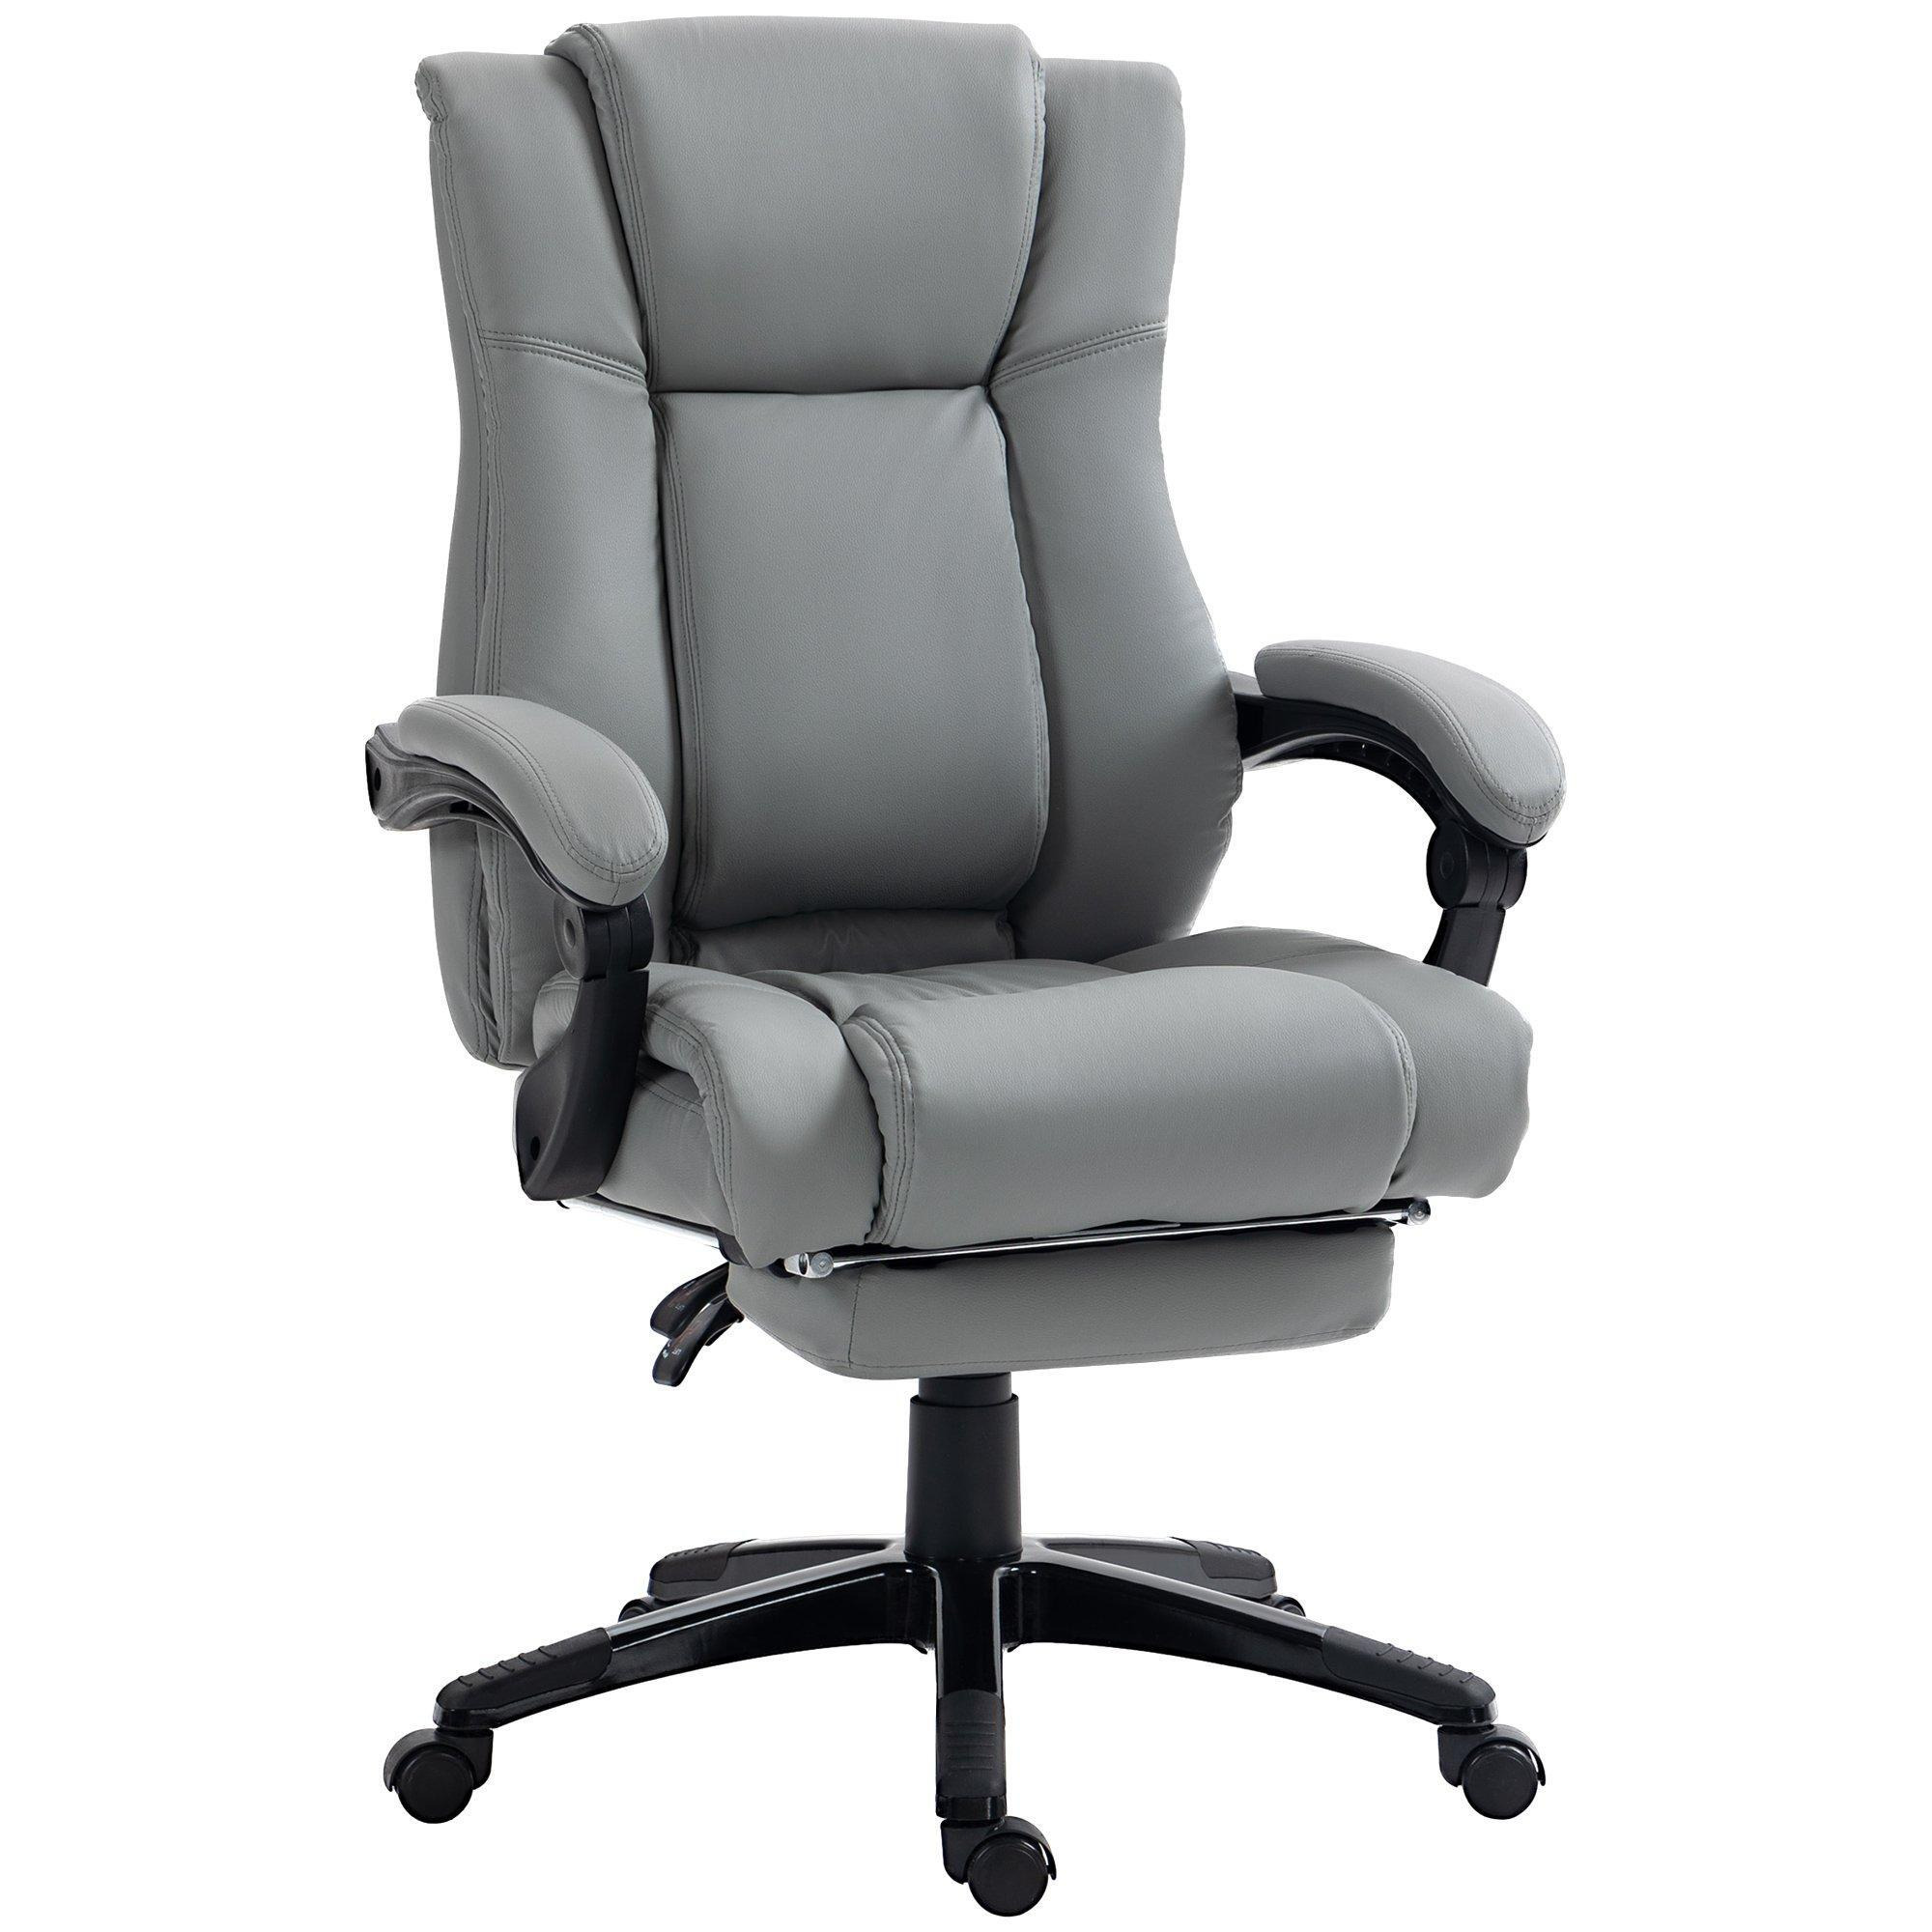 Executive Home Office Chair PU Leather Desk Chair with Foot Rest - image 1